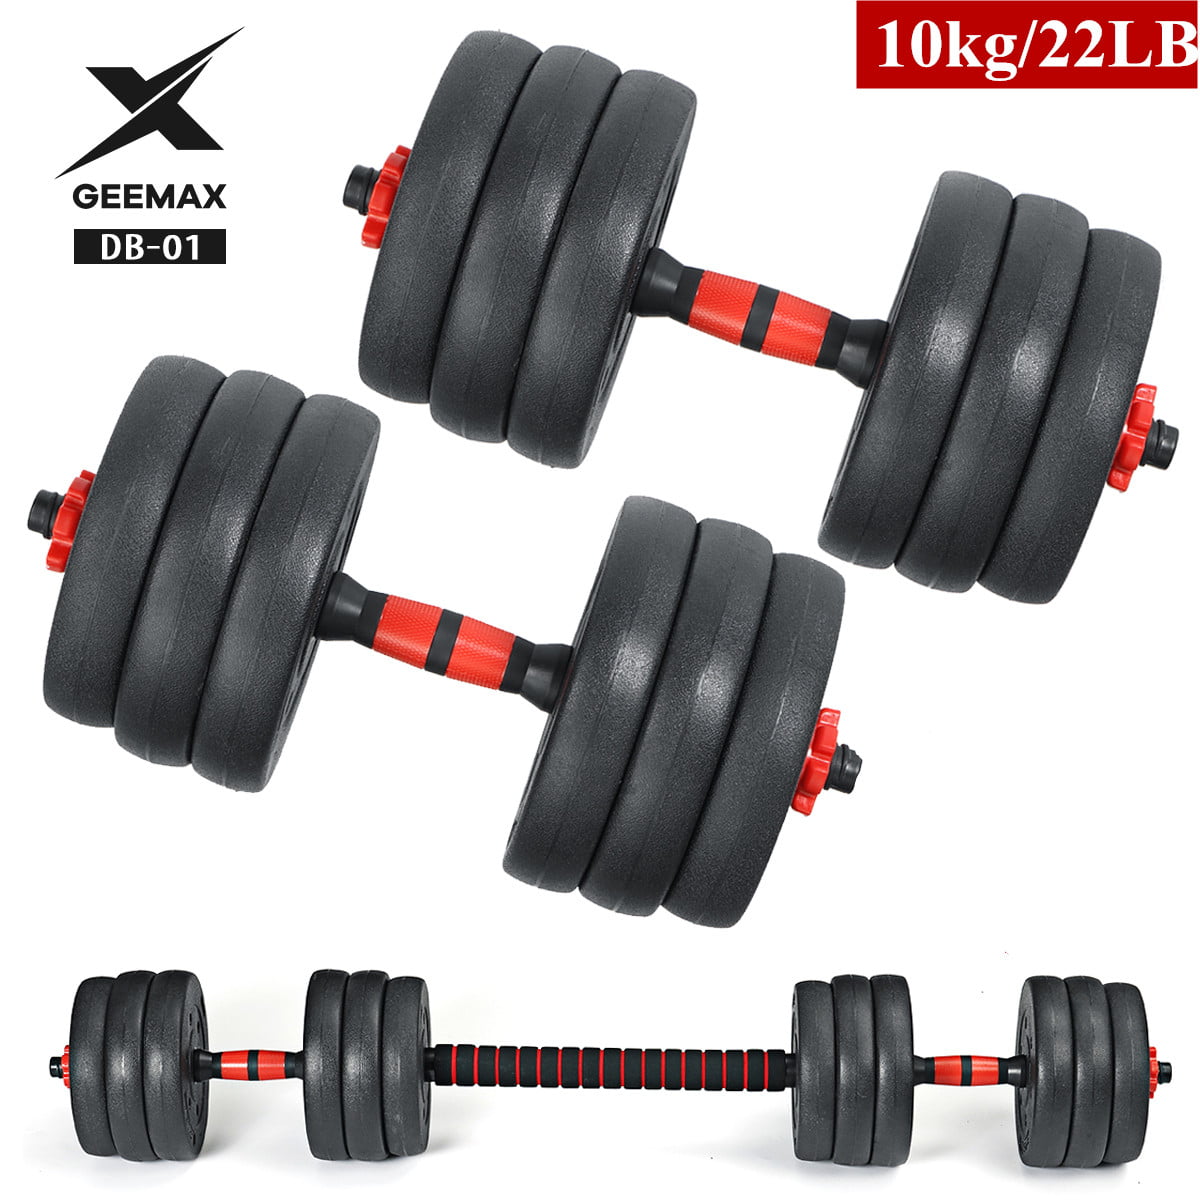 10KG/30KG DUMBELLS PAIR OF GYM WEIGHTS BARBELL/DUMBBELL BODY BUILDING WEIGHT SET 